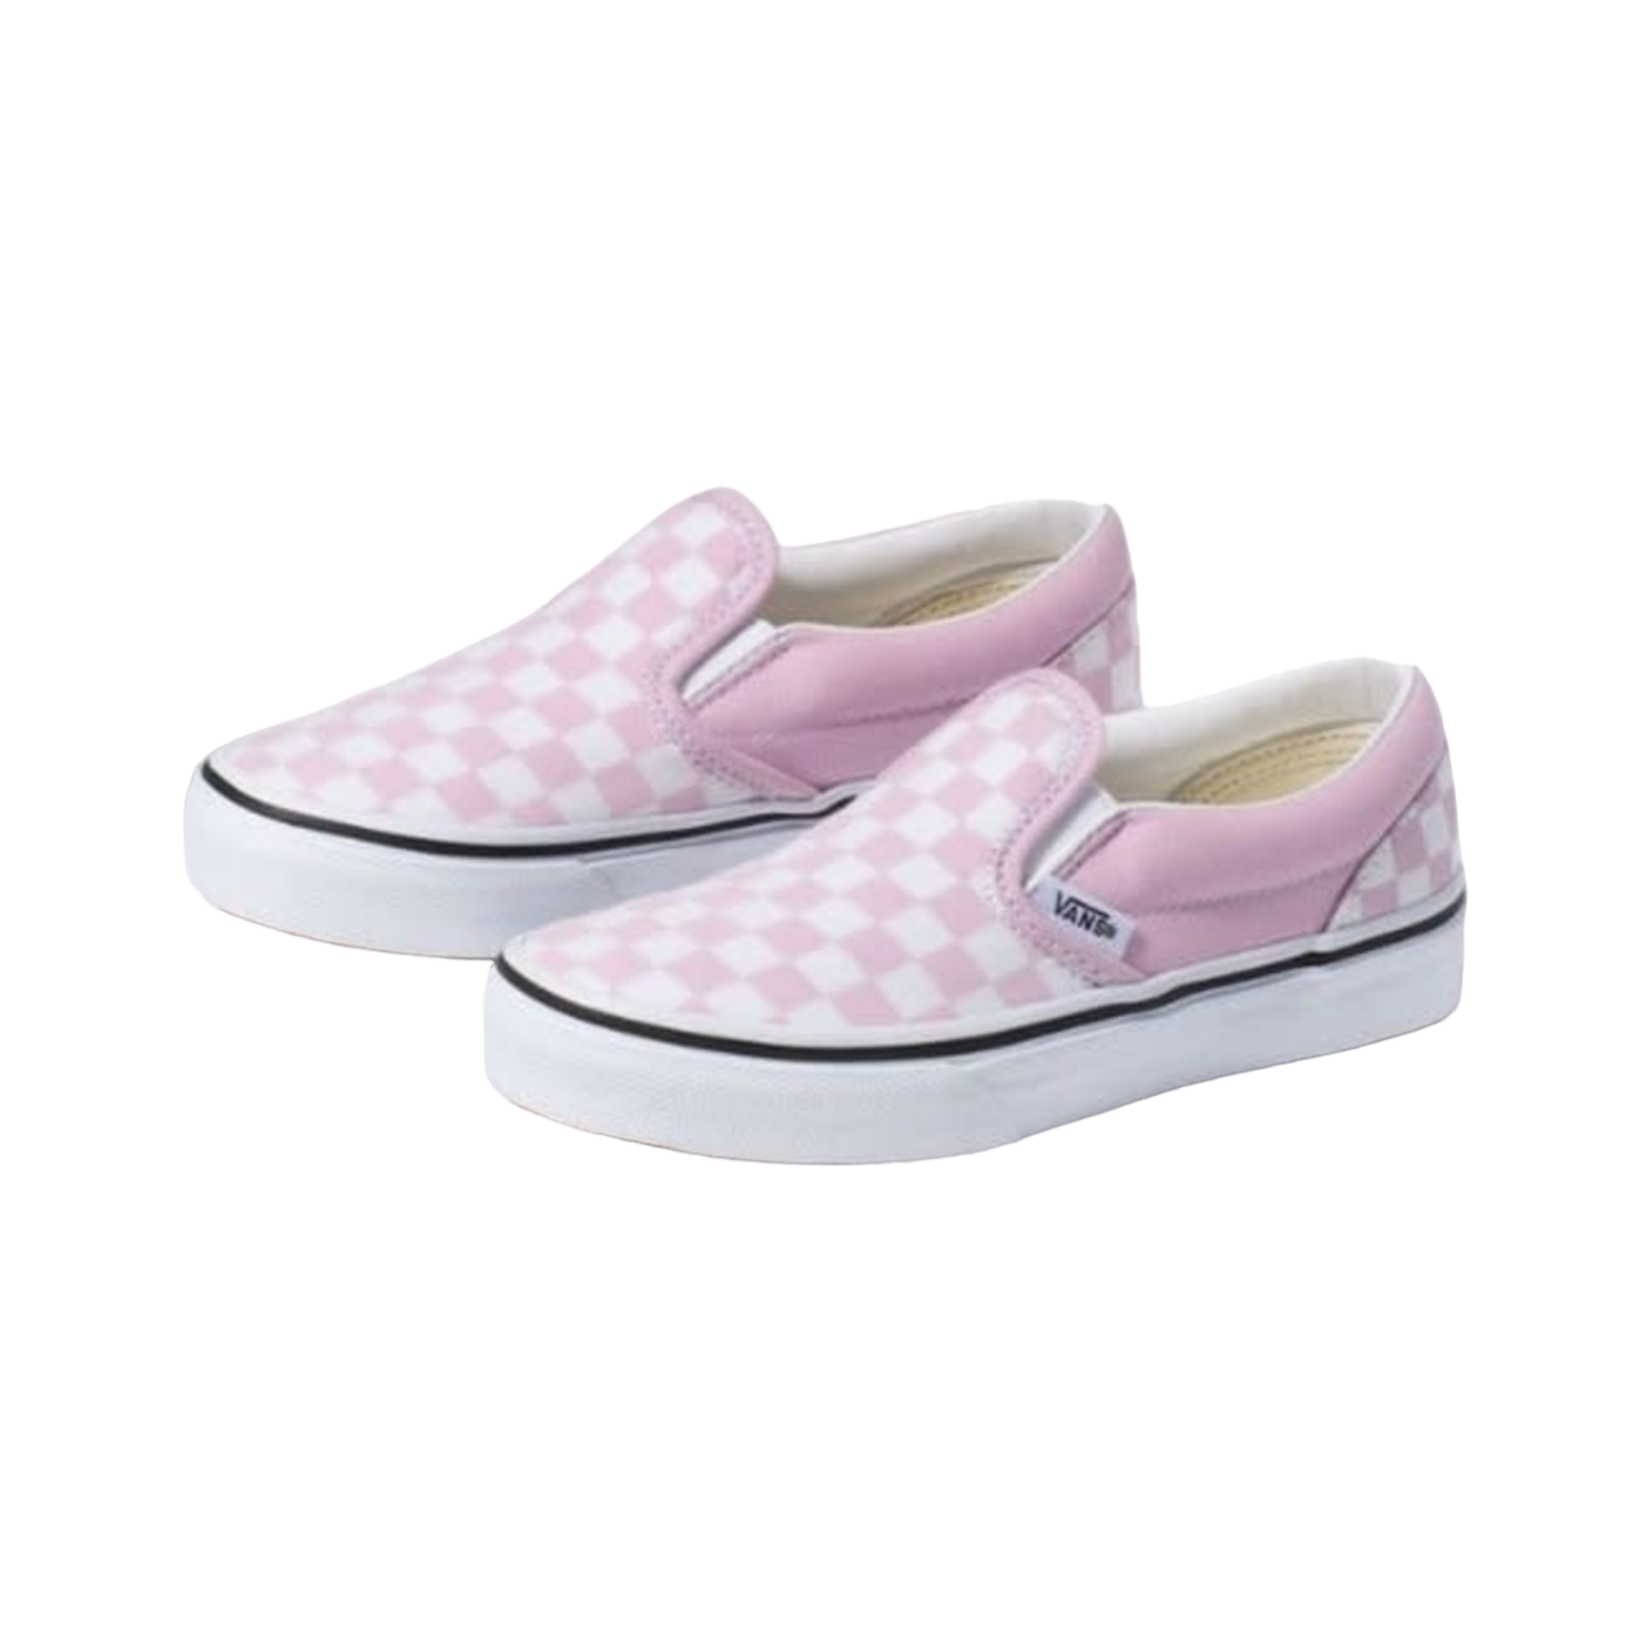 Vans Vans Classic Slip-On Youth Skate Shoes - Checker/Lilac -